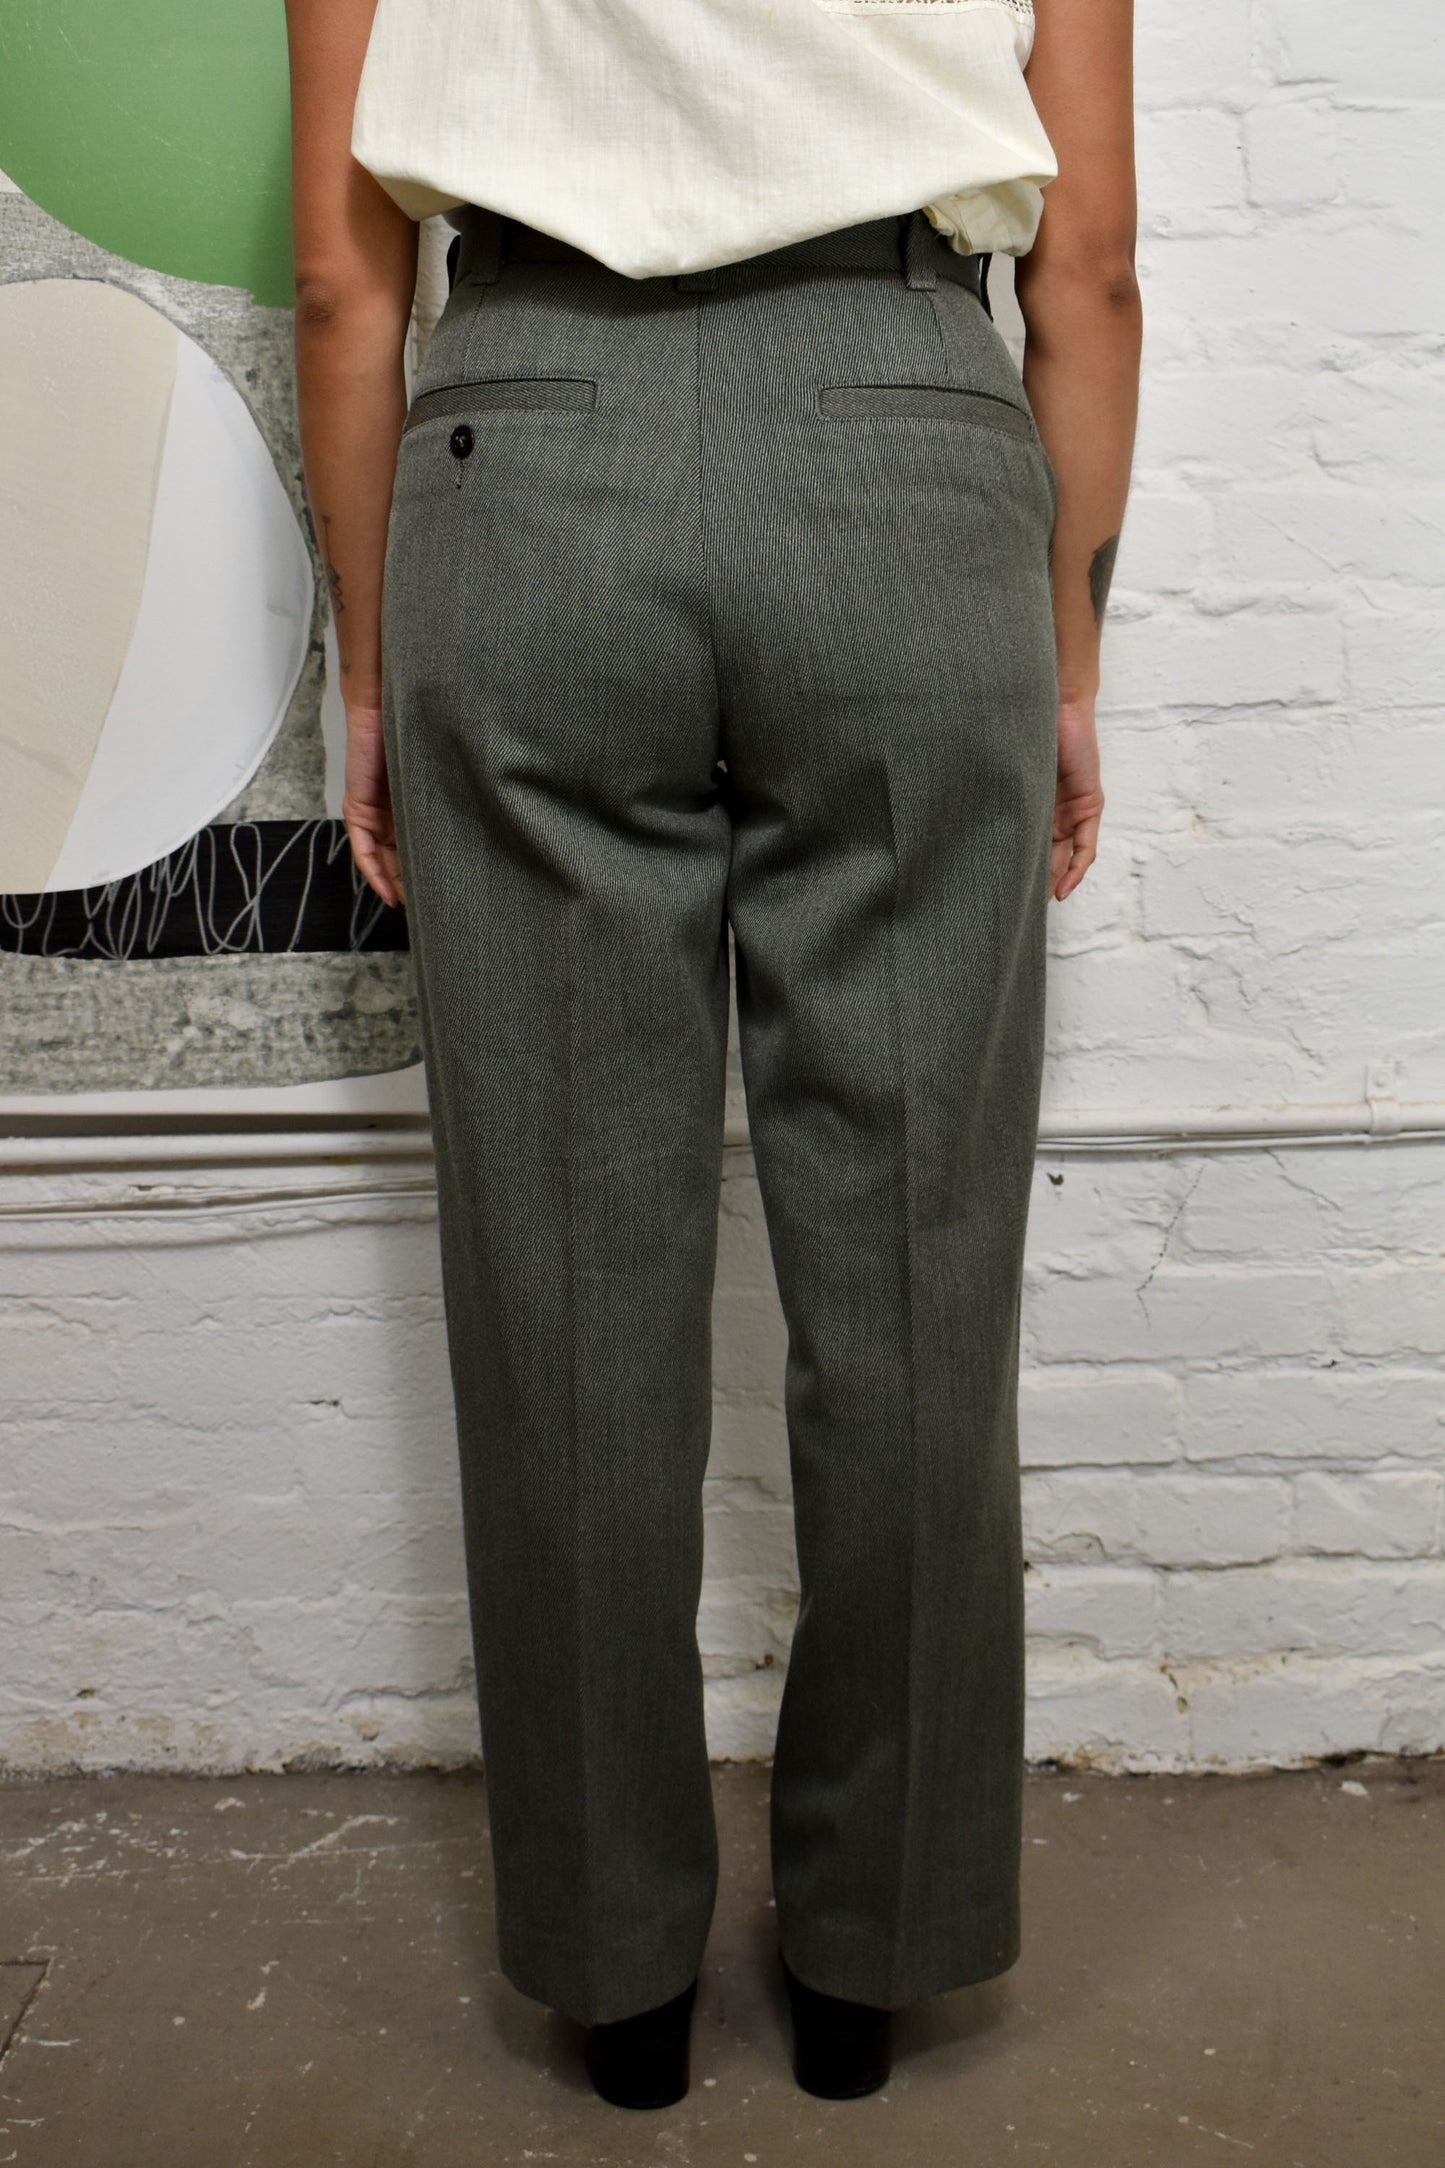 Vintage 1970's "C.C. Filson" Wool Whipcord Trousers